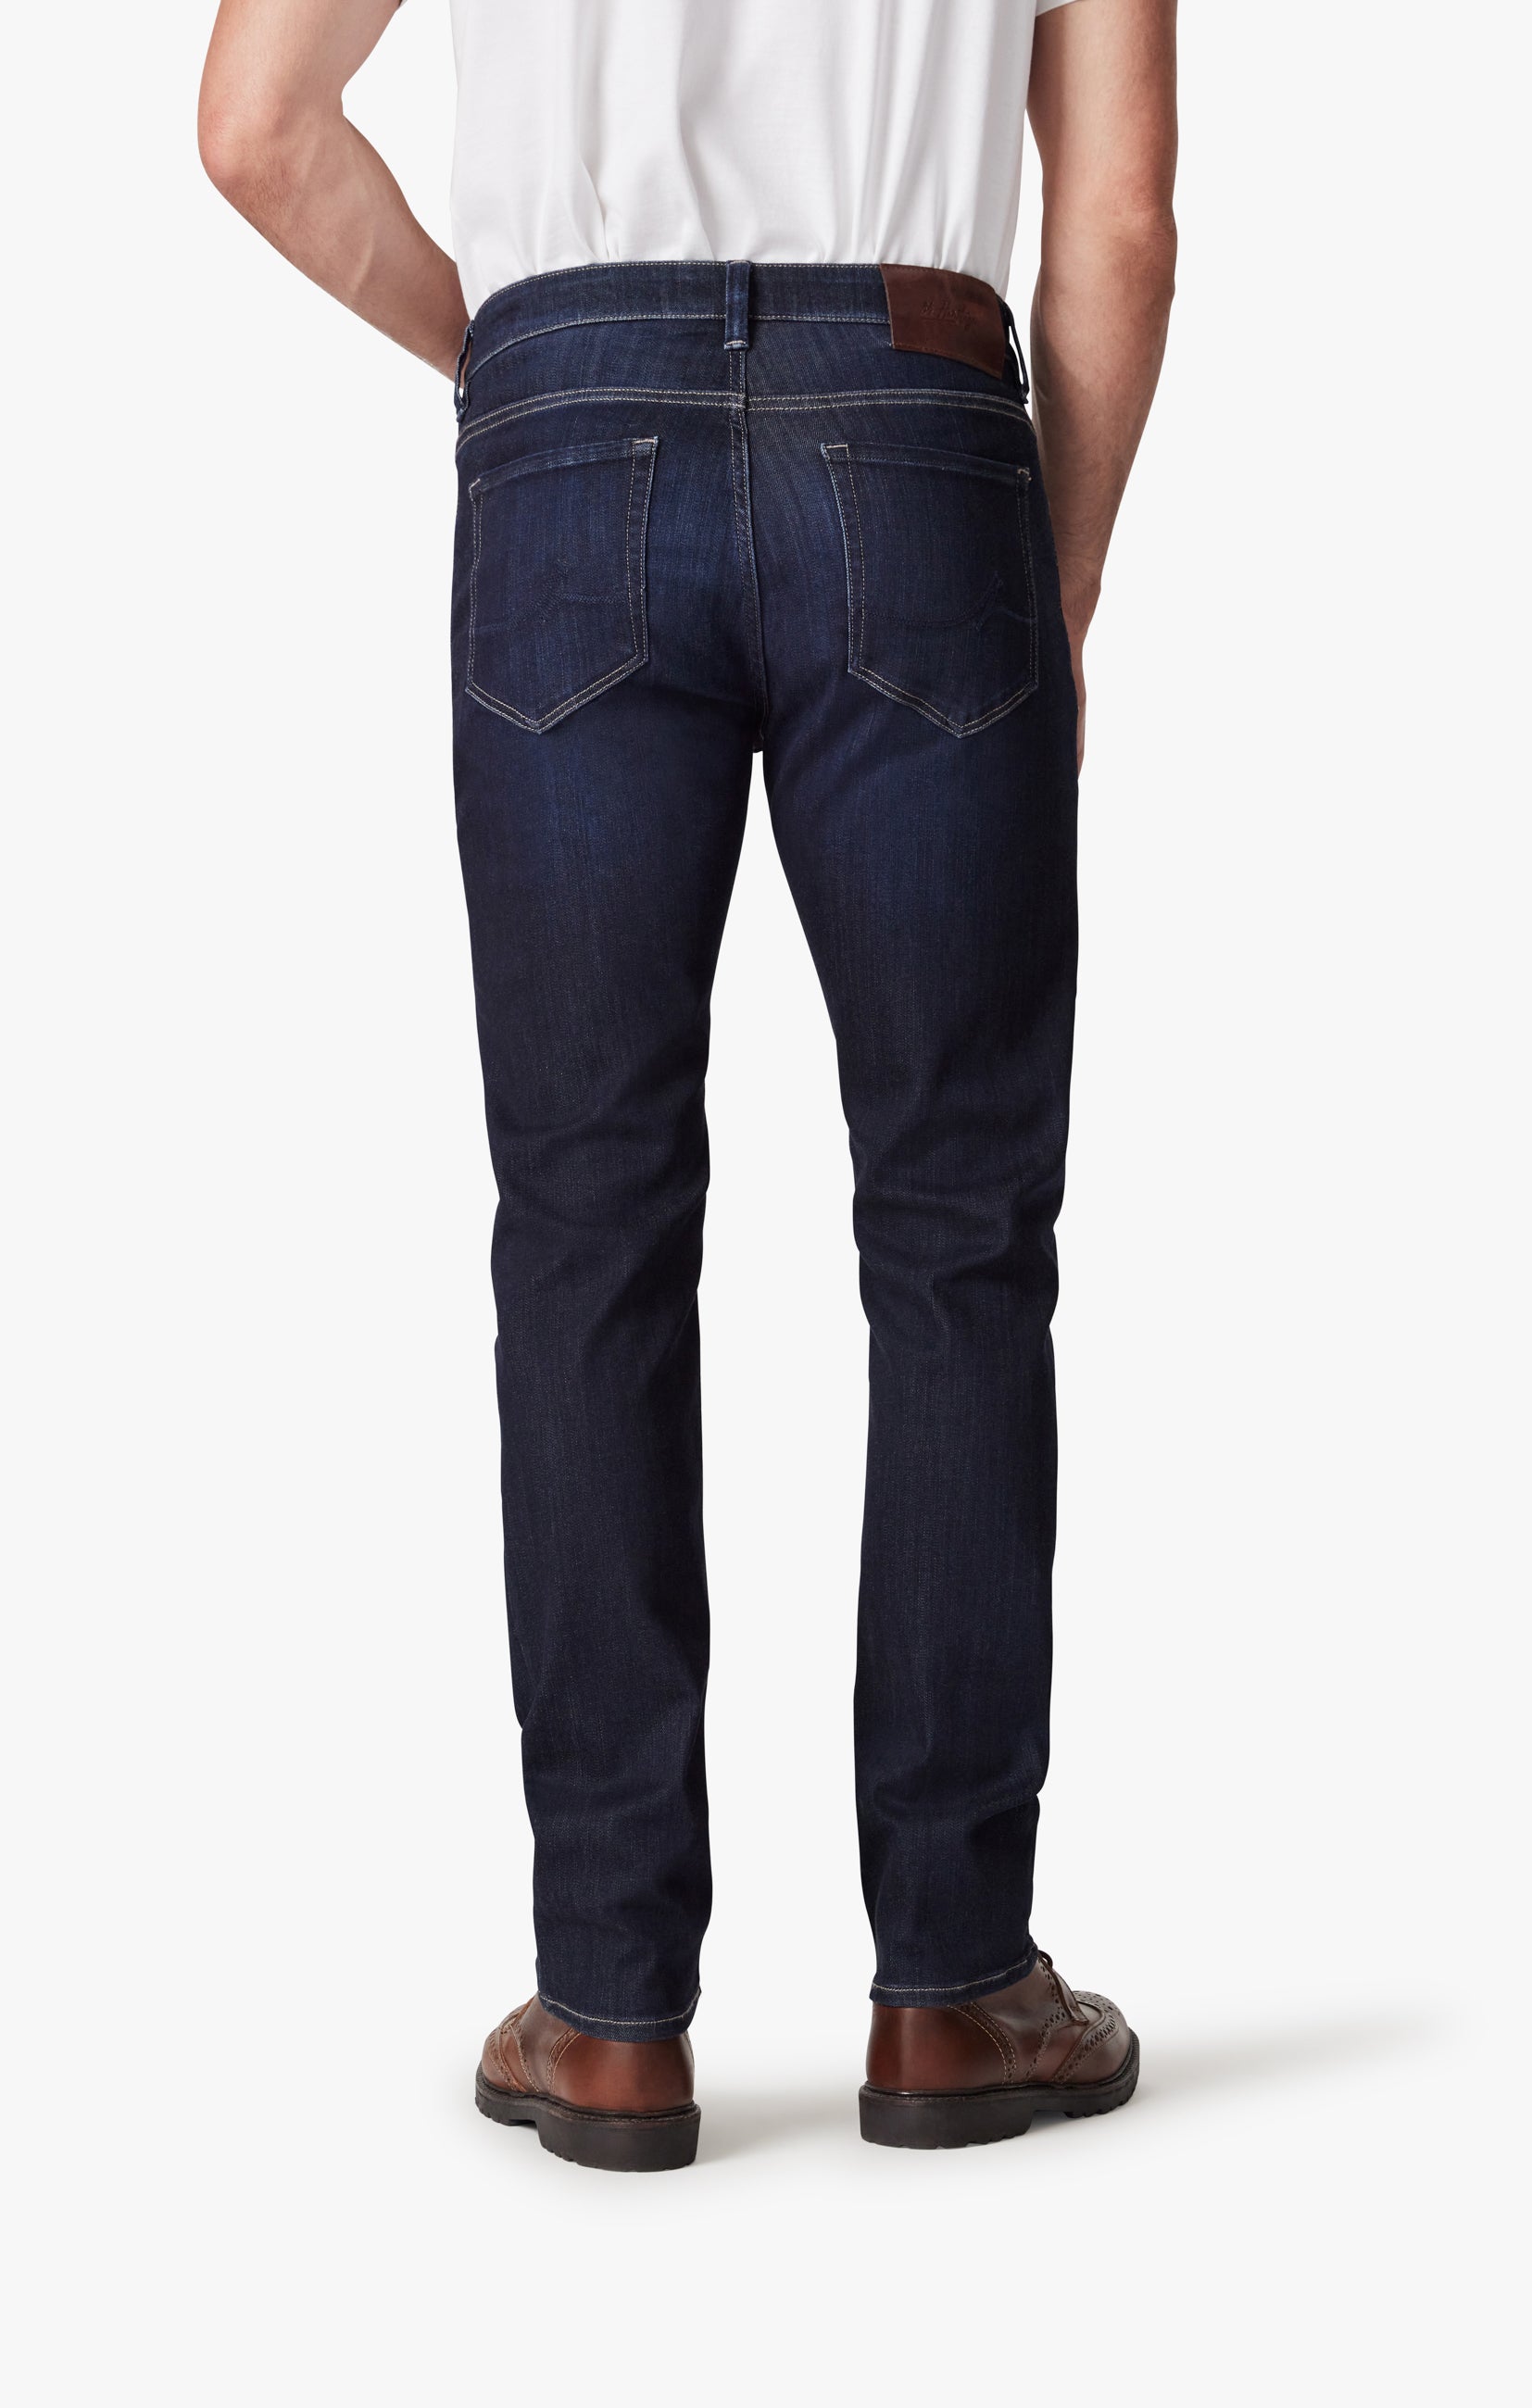 Champ Athletic Fit Jeans in Deep Refined Image 6